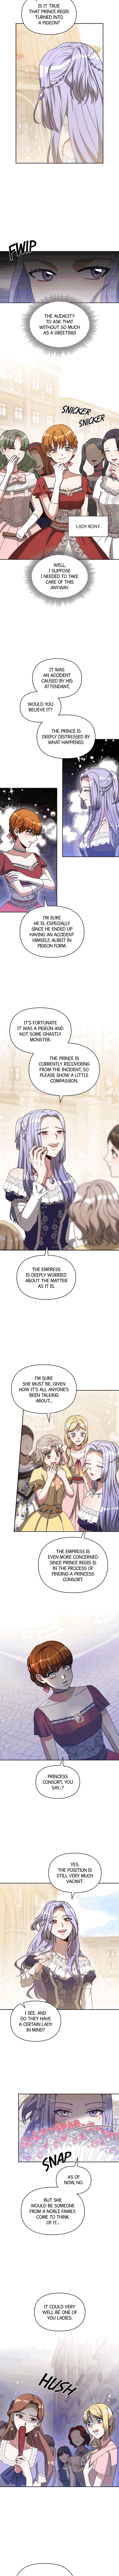 The Forgotten Princess Wants To Live In Peace Chapter 59.5 page 3